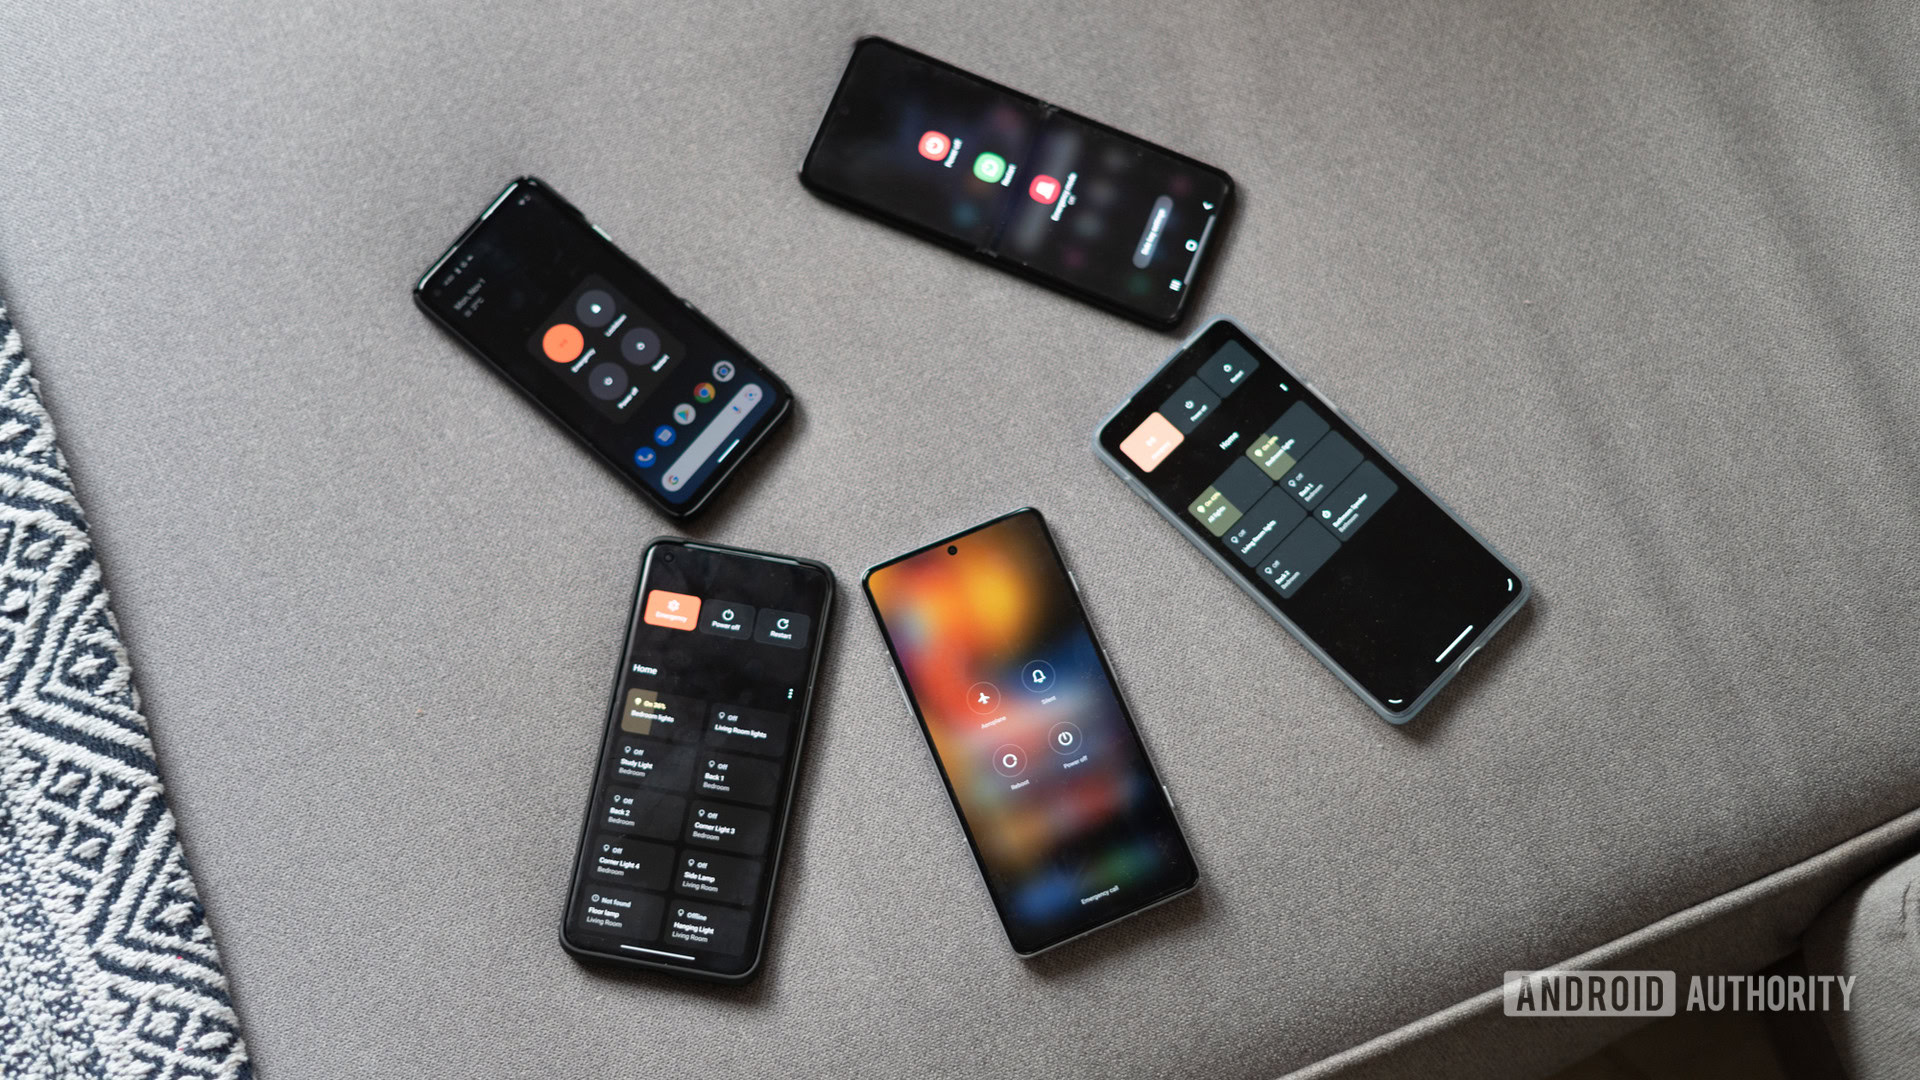 power buttons on top-down Android phones that display multiple phones